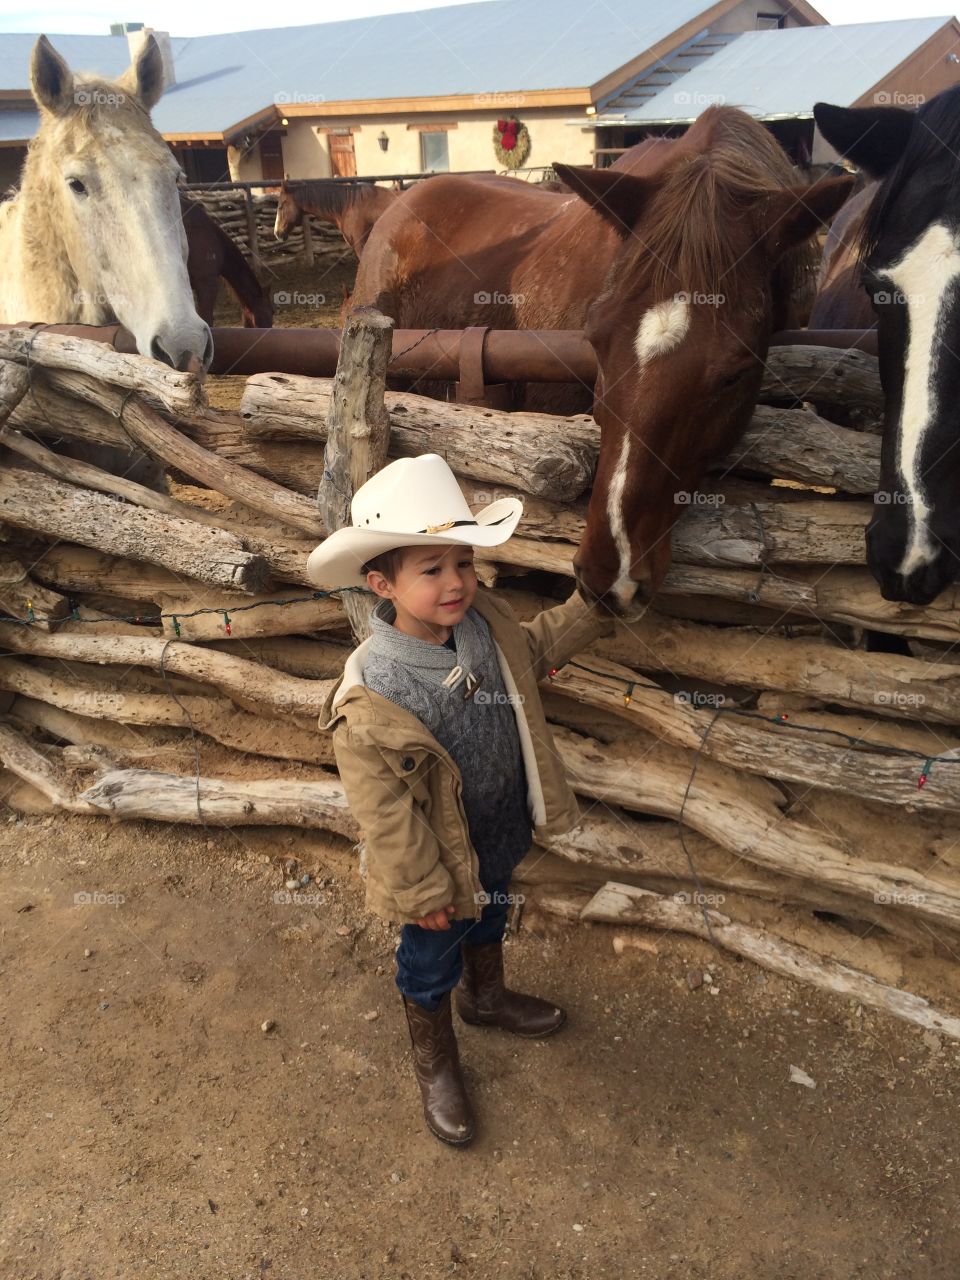 Cowboy in the Making . 
Visiting the horses at a dude ranch.